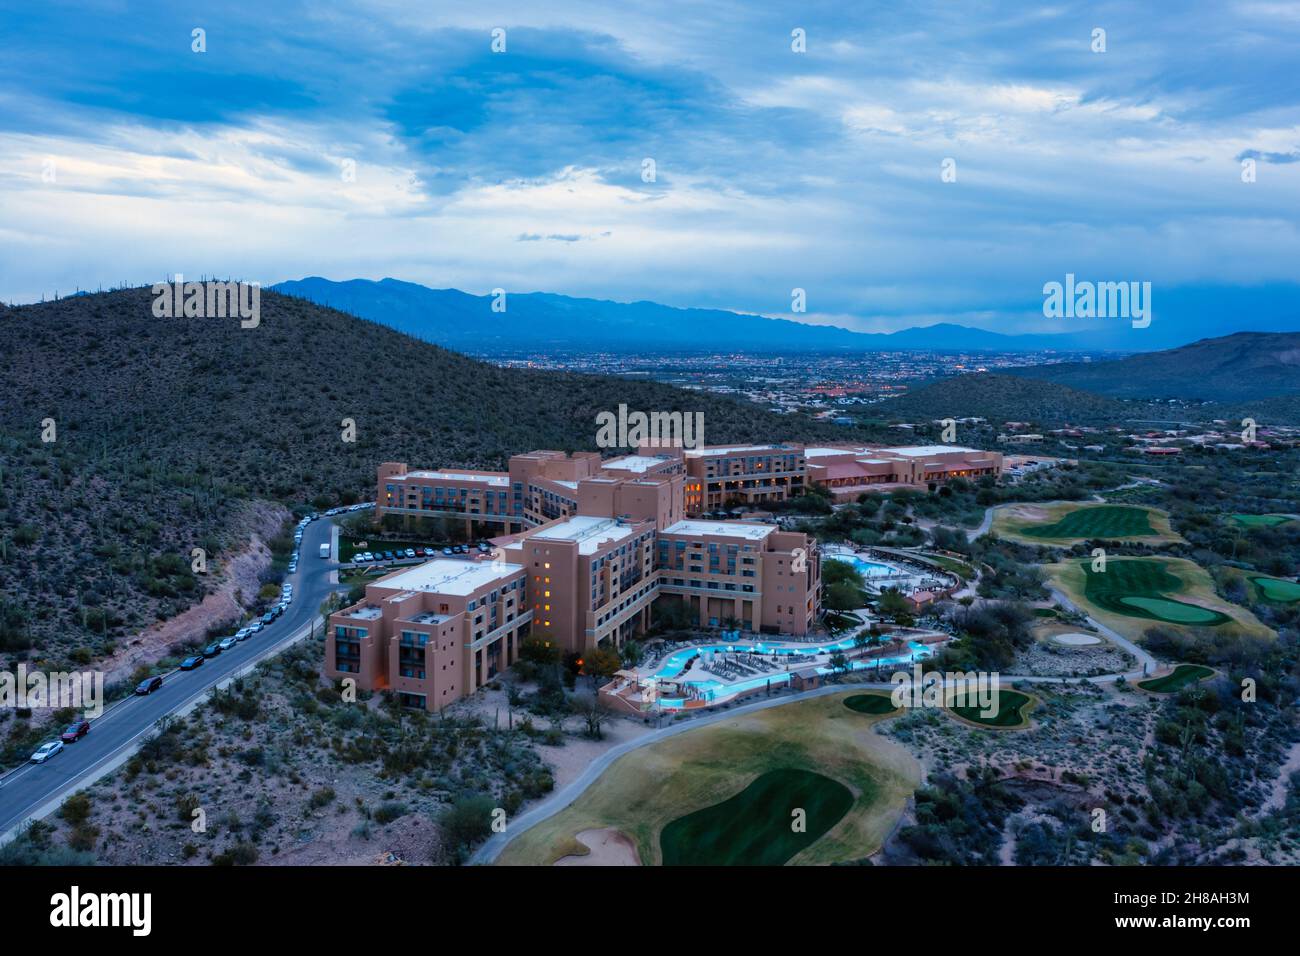 JW Marriott Starr Pass Resort and Spa at Tucson, Arizona in morning. Stock Photo